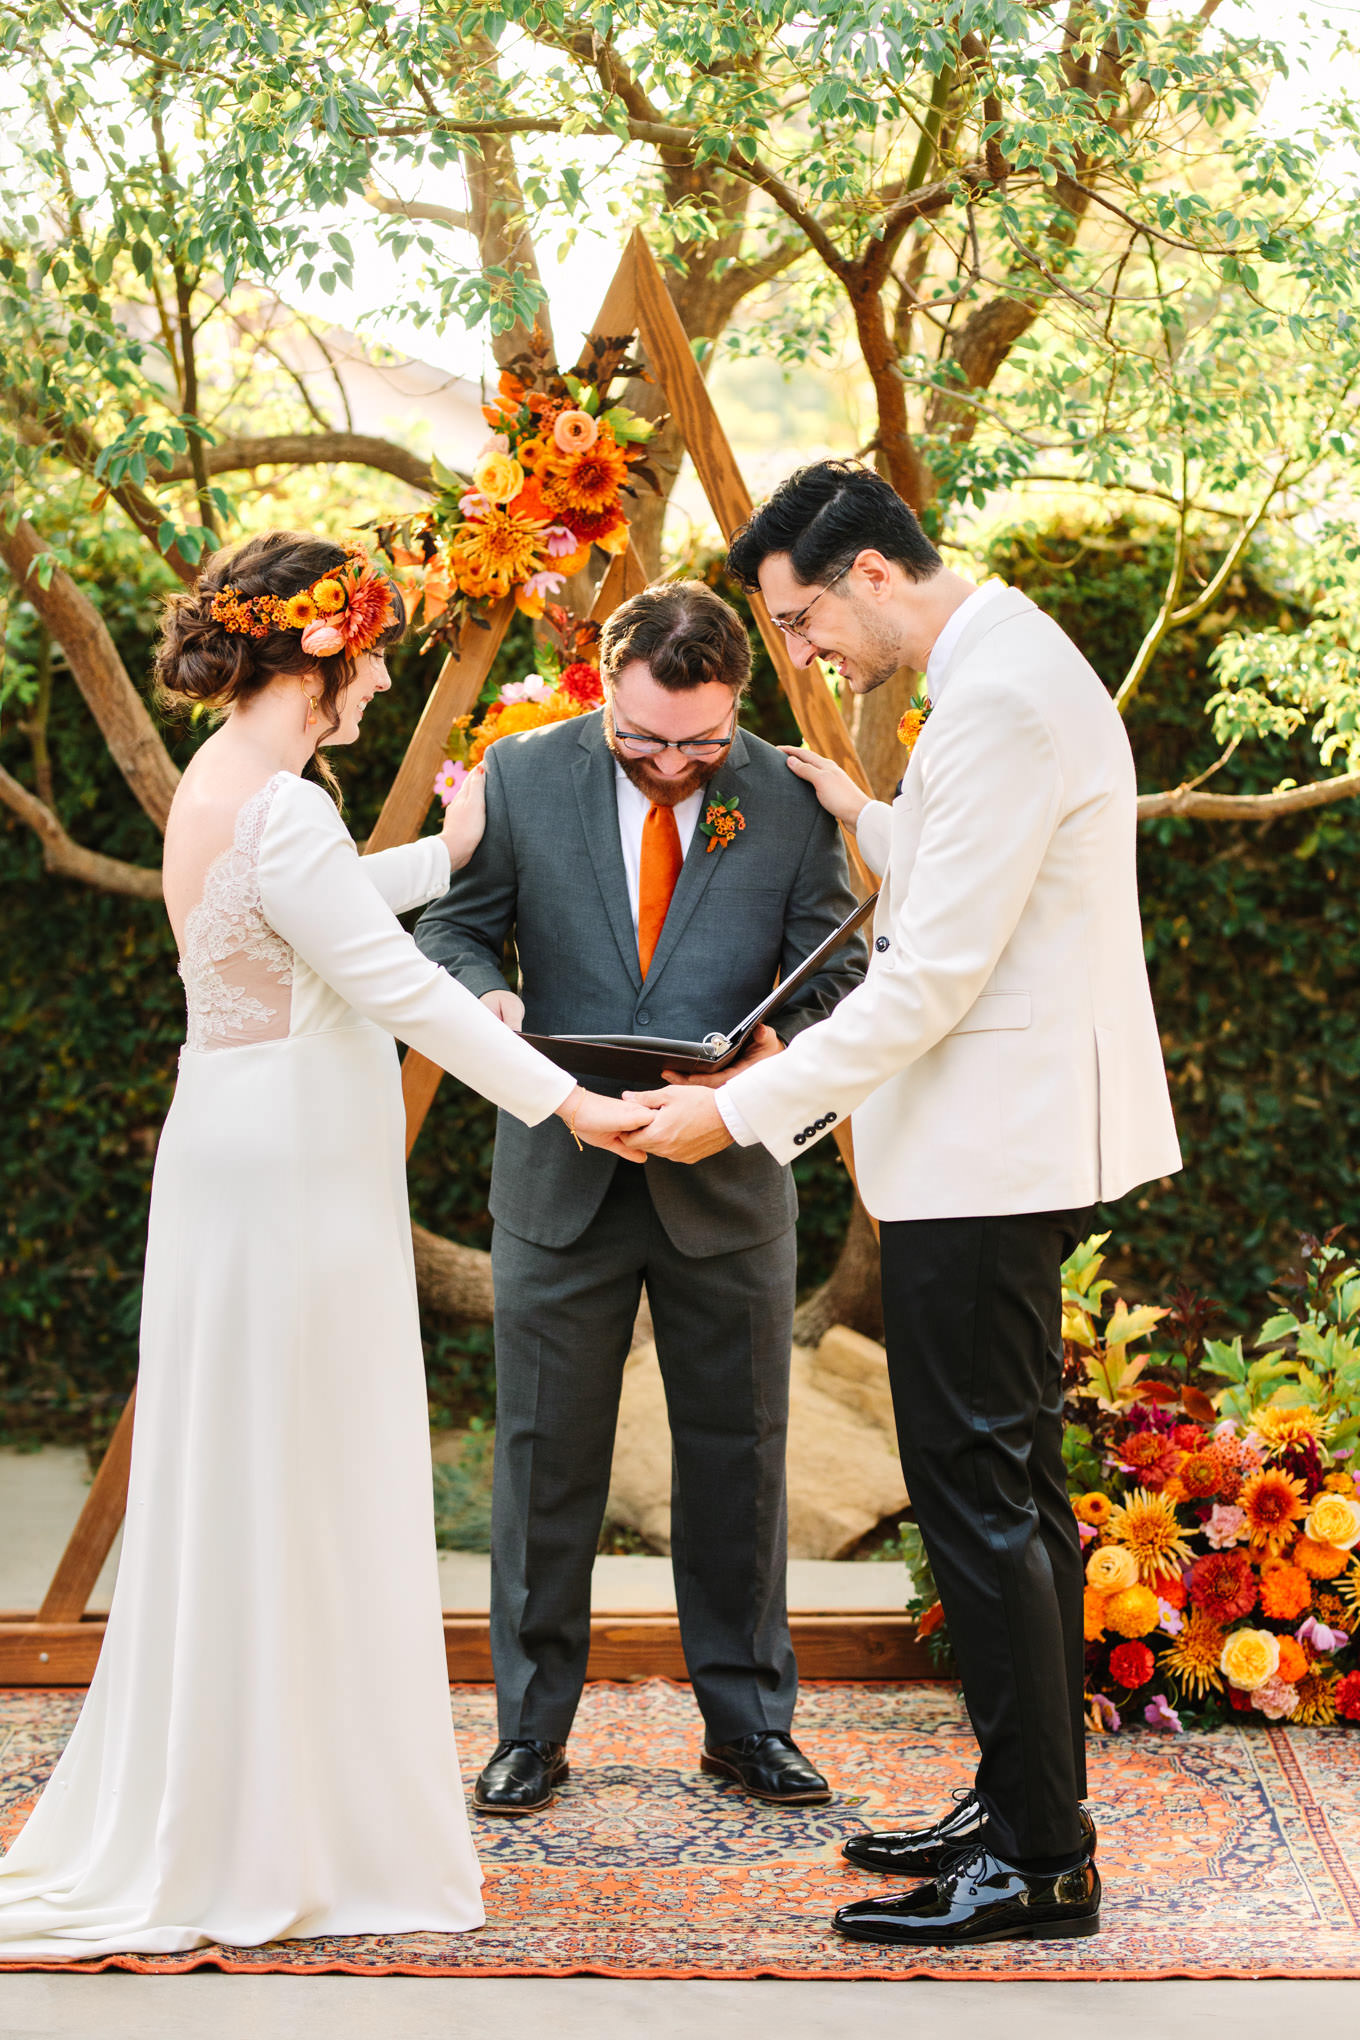 Bride and groom and officiant in prayer | Vibrant backyard micro wedding featured on Green Wedding Shoes | Colorful LA wedding photography | #losangeleswedding #backyardwedding #microwedding #laweddingphotographer Source: Mary Costa Photography | Los Angeles